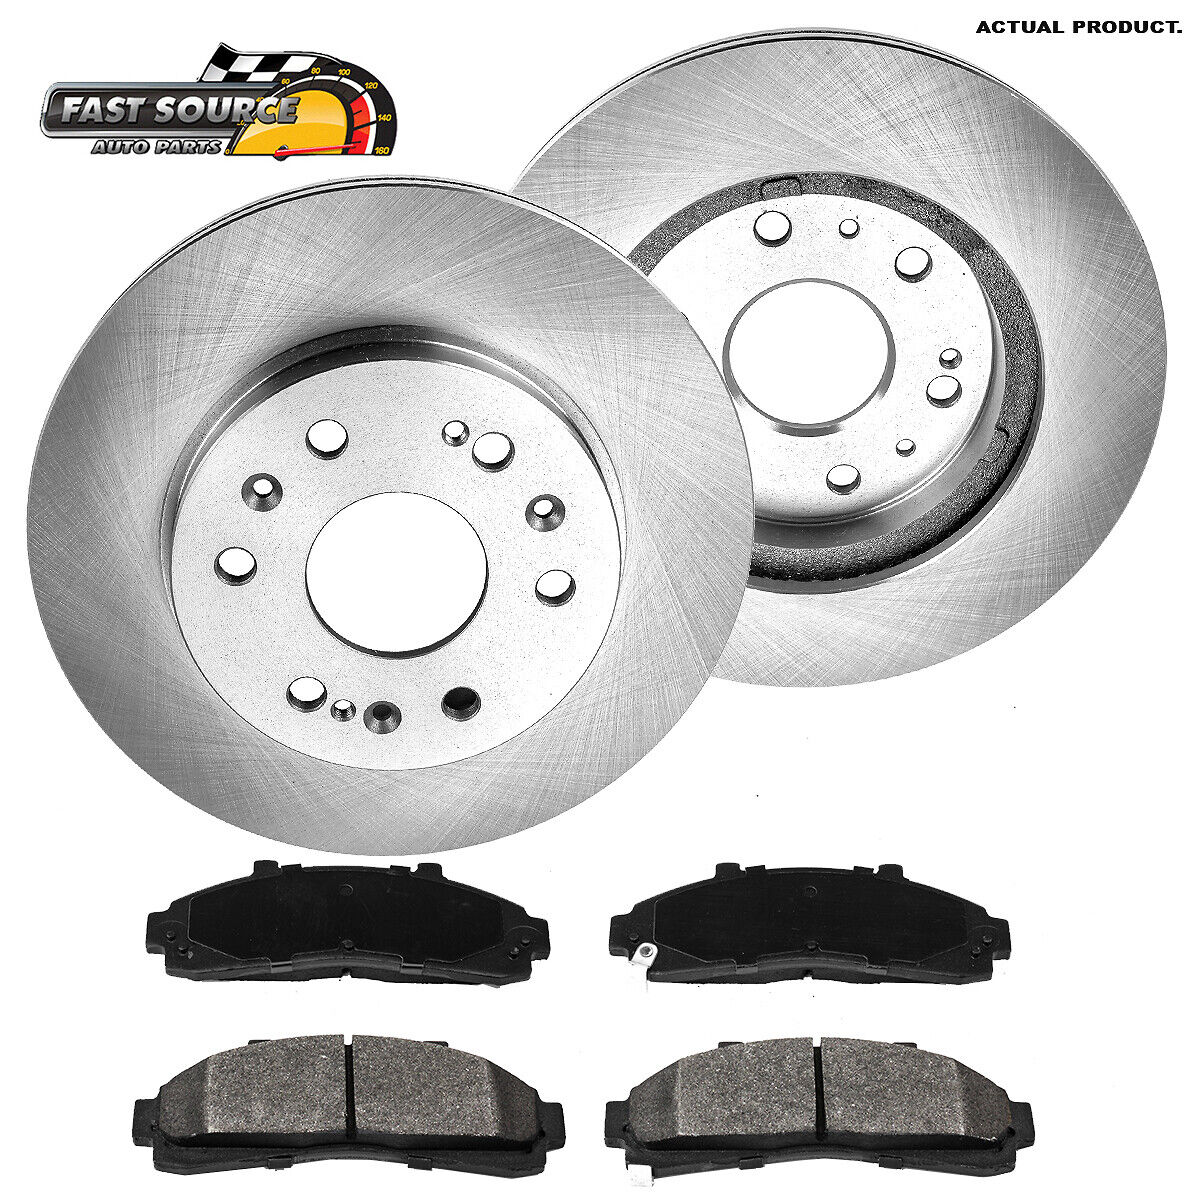 Front Brake Rotors And Metallic Pads For 4WD Ford Explorer Ranger Mountaineer